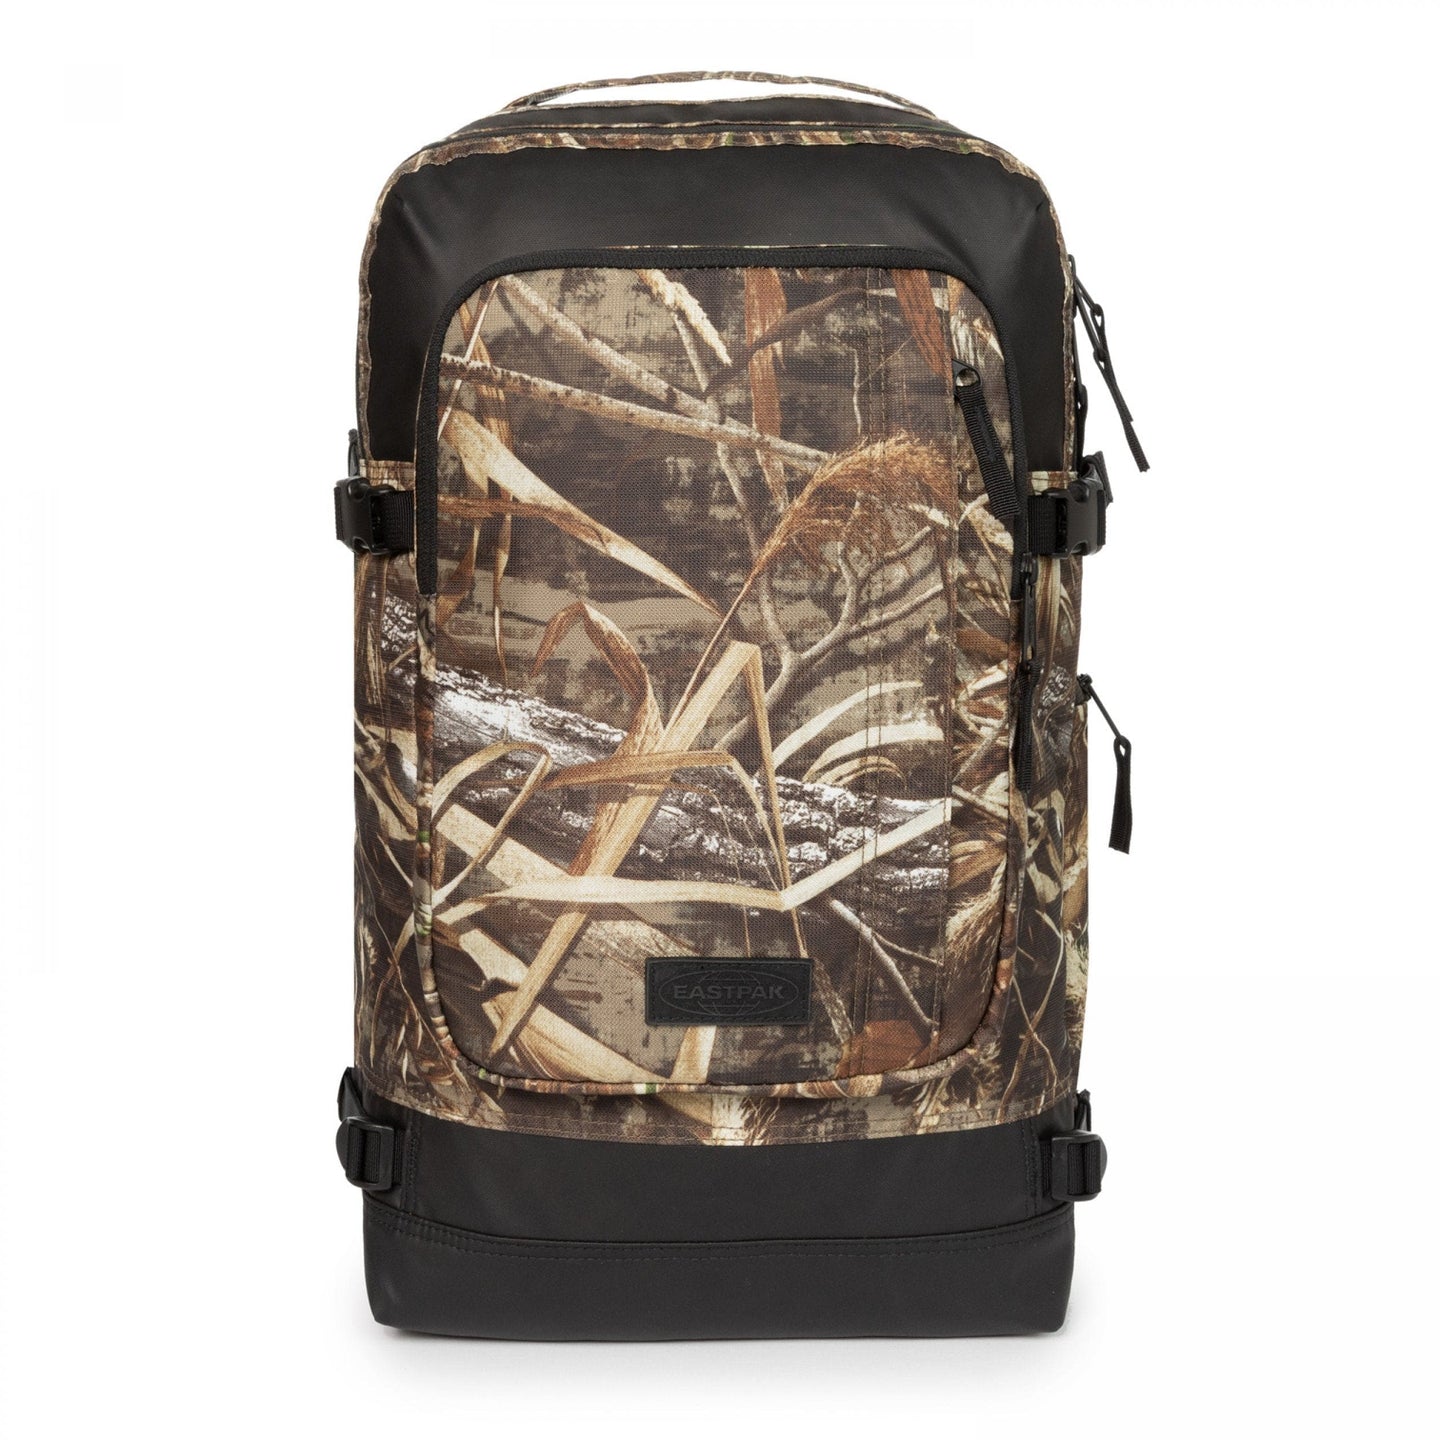 Tecum L Realtree Camo backpack front view